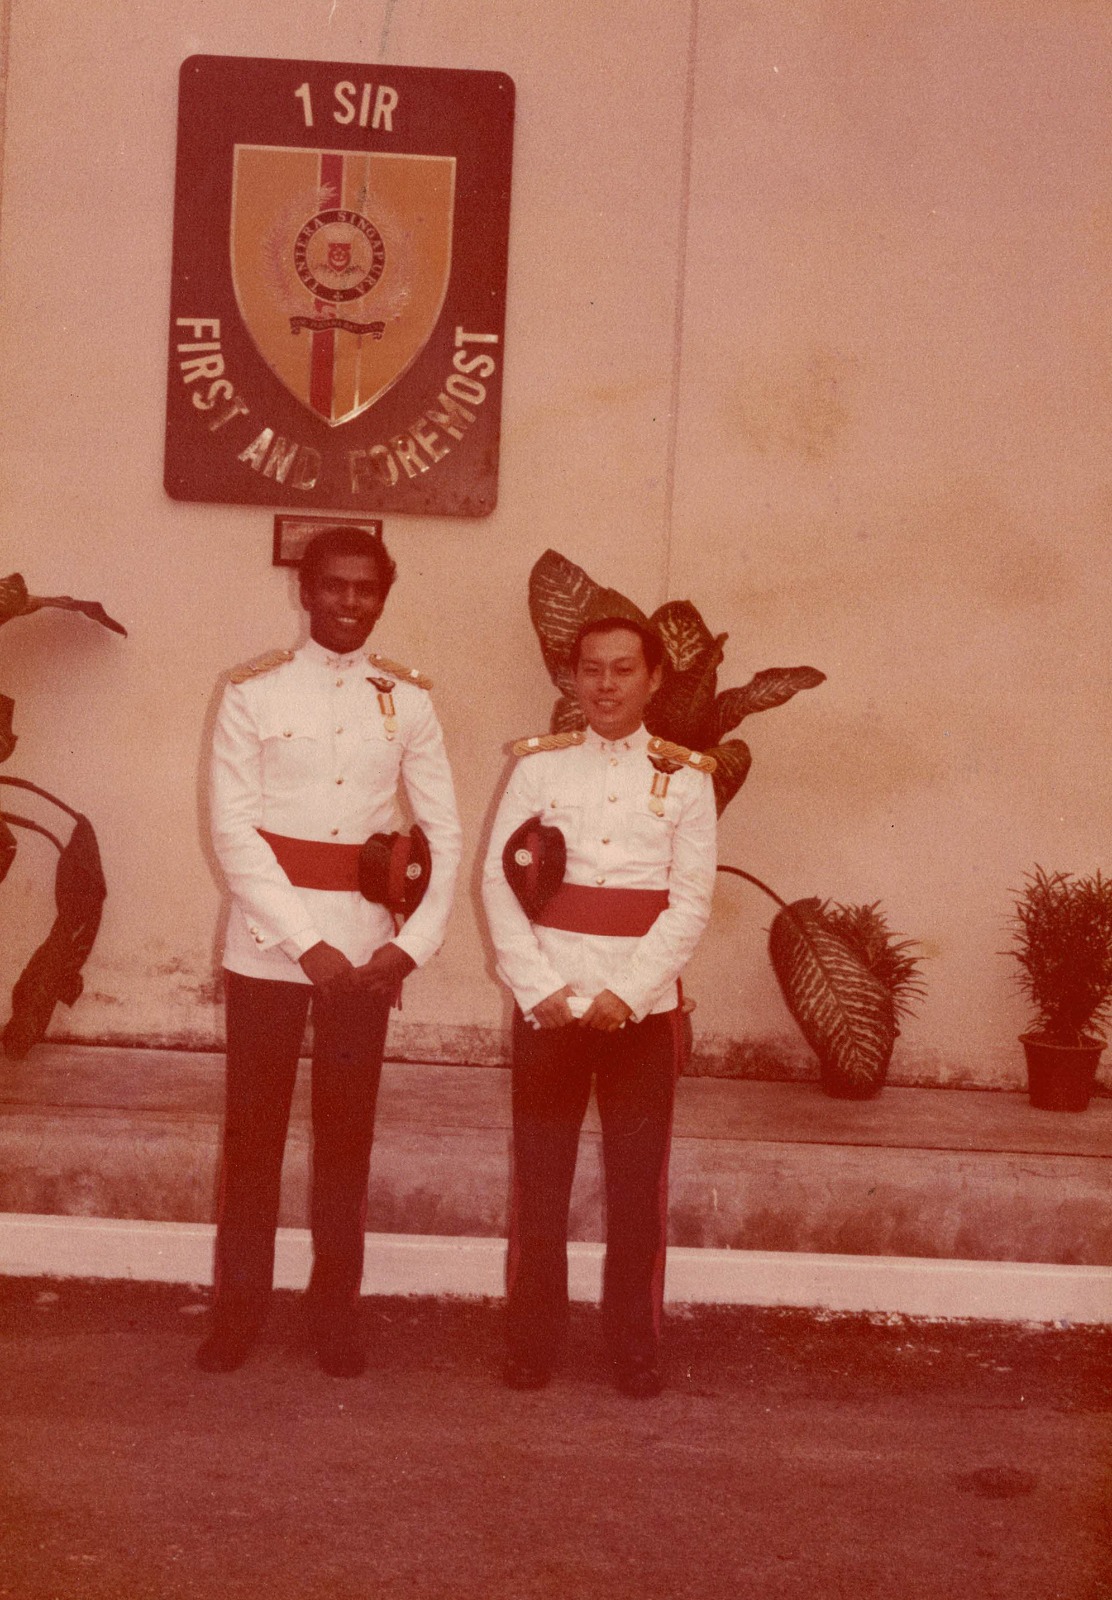 Andrew and Suresh in their 1 SIR Ceremonial Dress, taken during the 1 SIR Trooping of Colours.